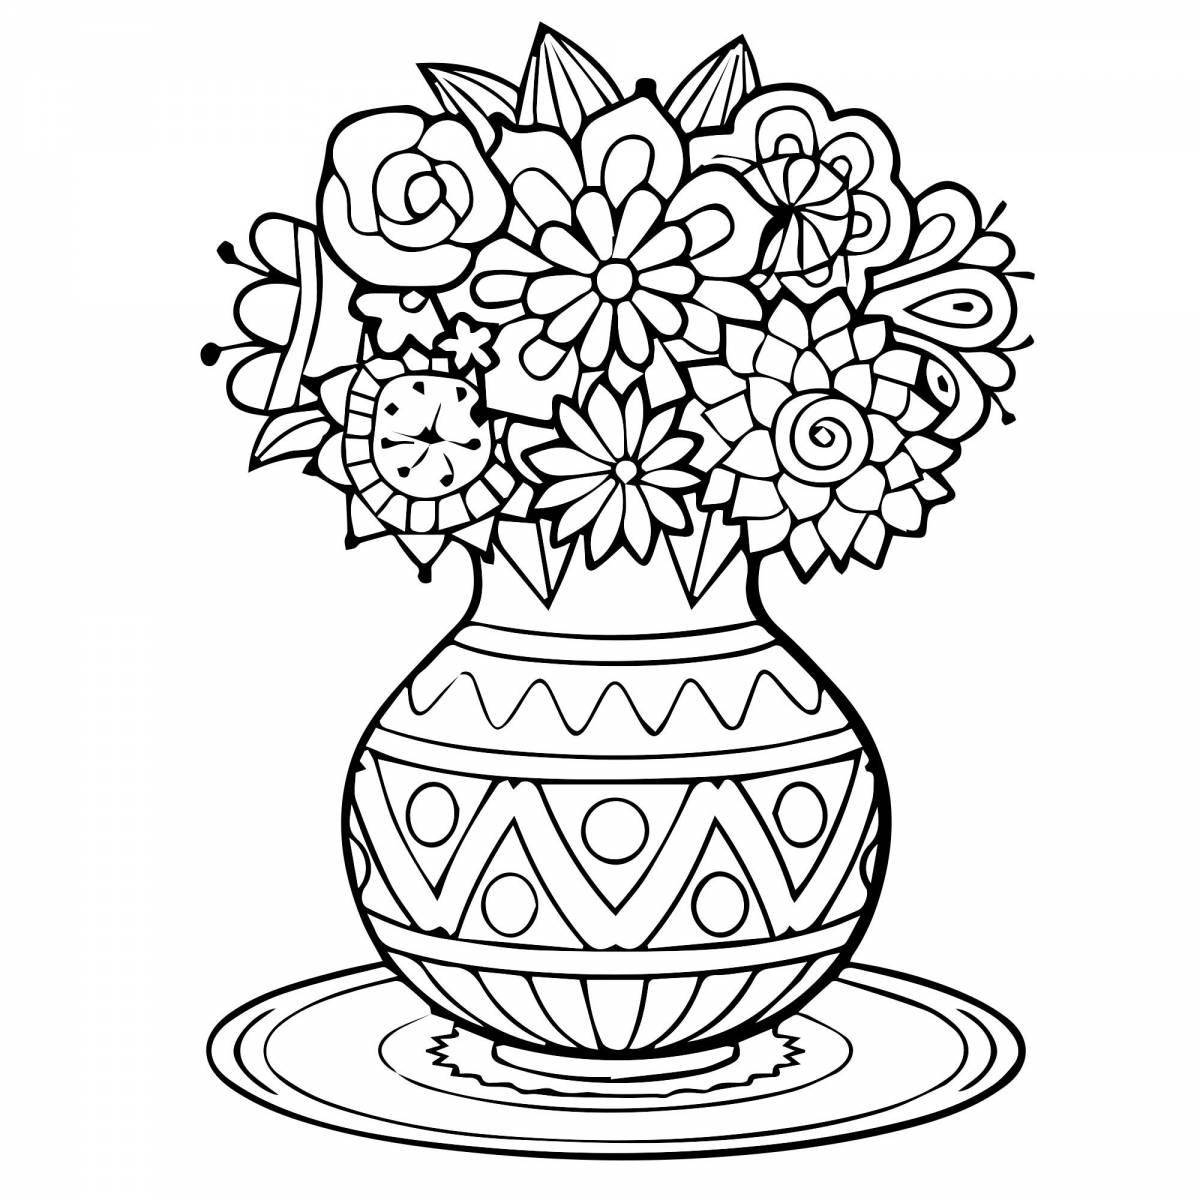 Exquisite flower vase coloring book for 5-6 year olds